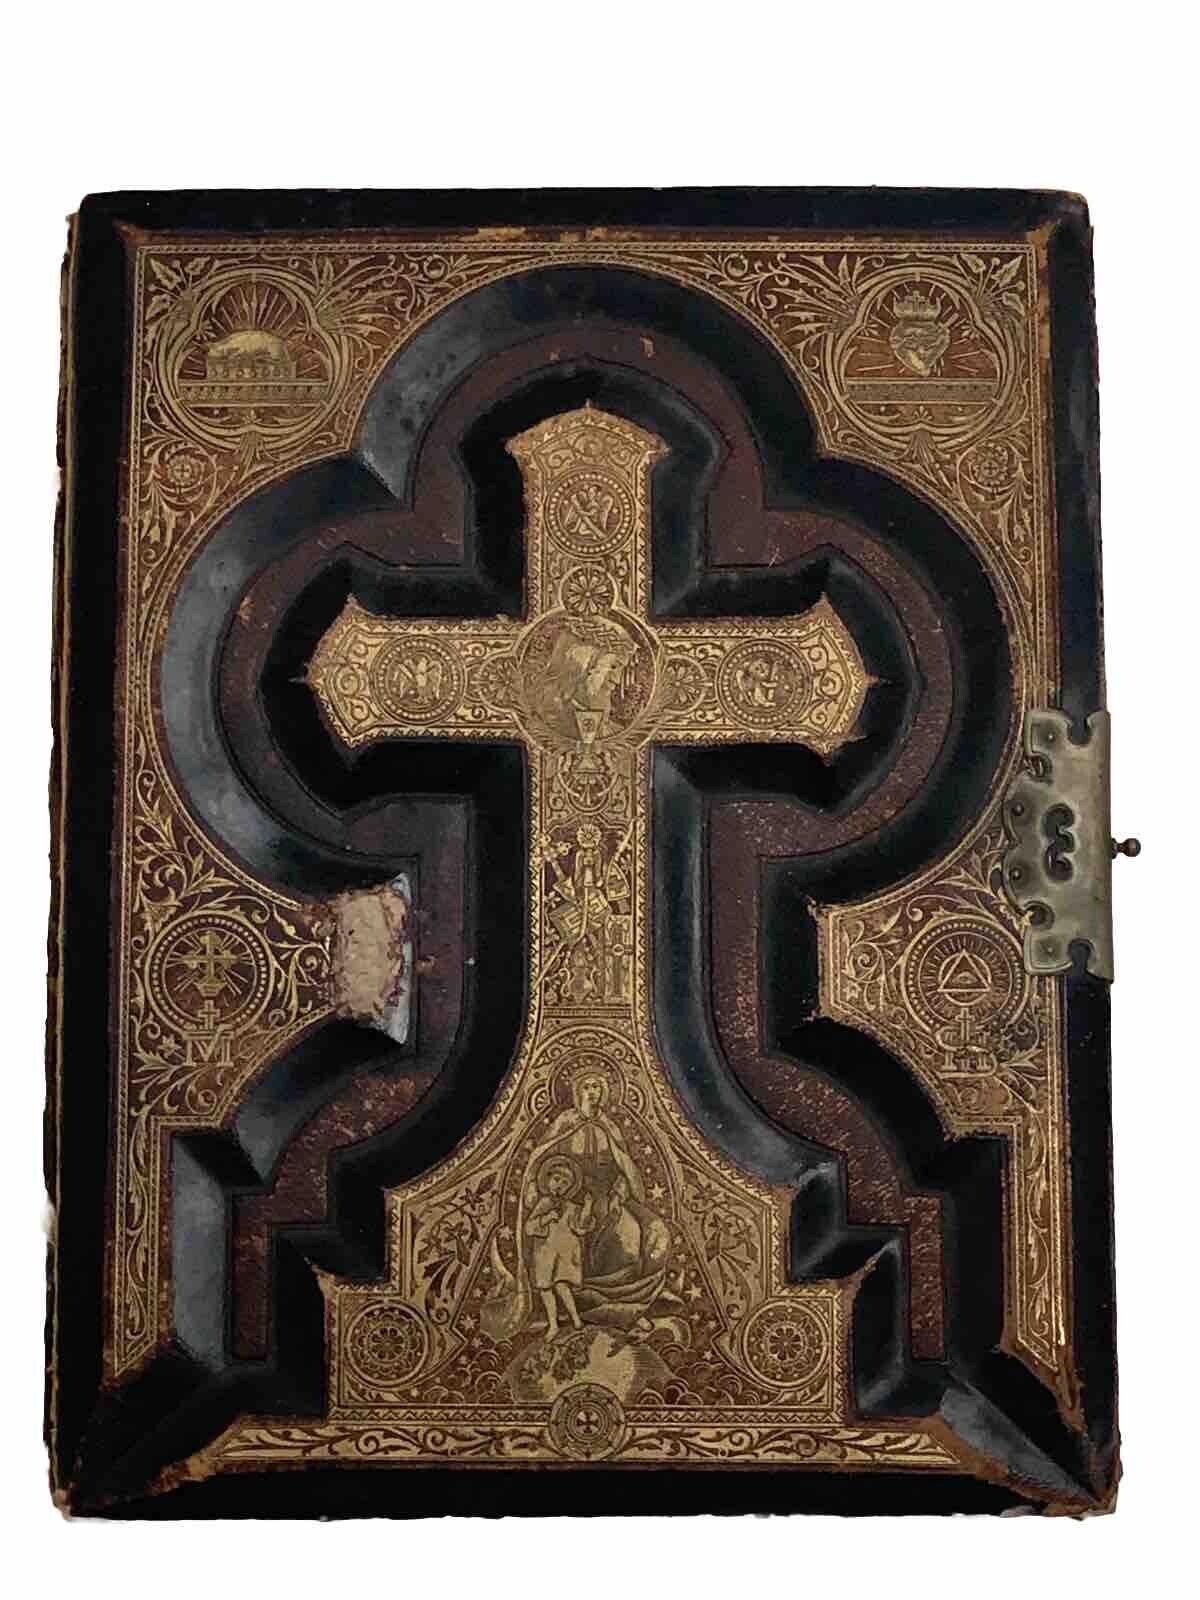 HOLY BIBLE 1880’s DOUAY&RHEIM GOLD LEATHER GILDED EDGES ANTIQUE RARE